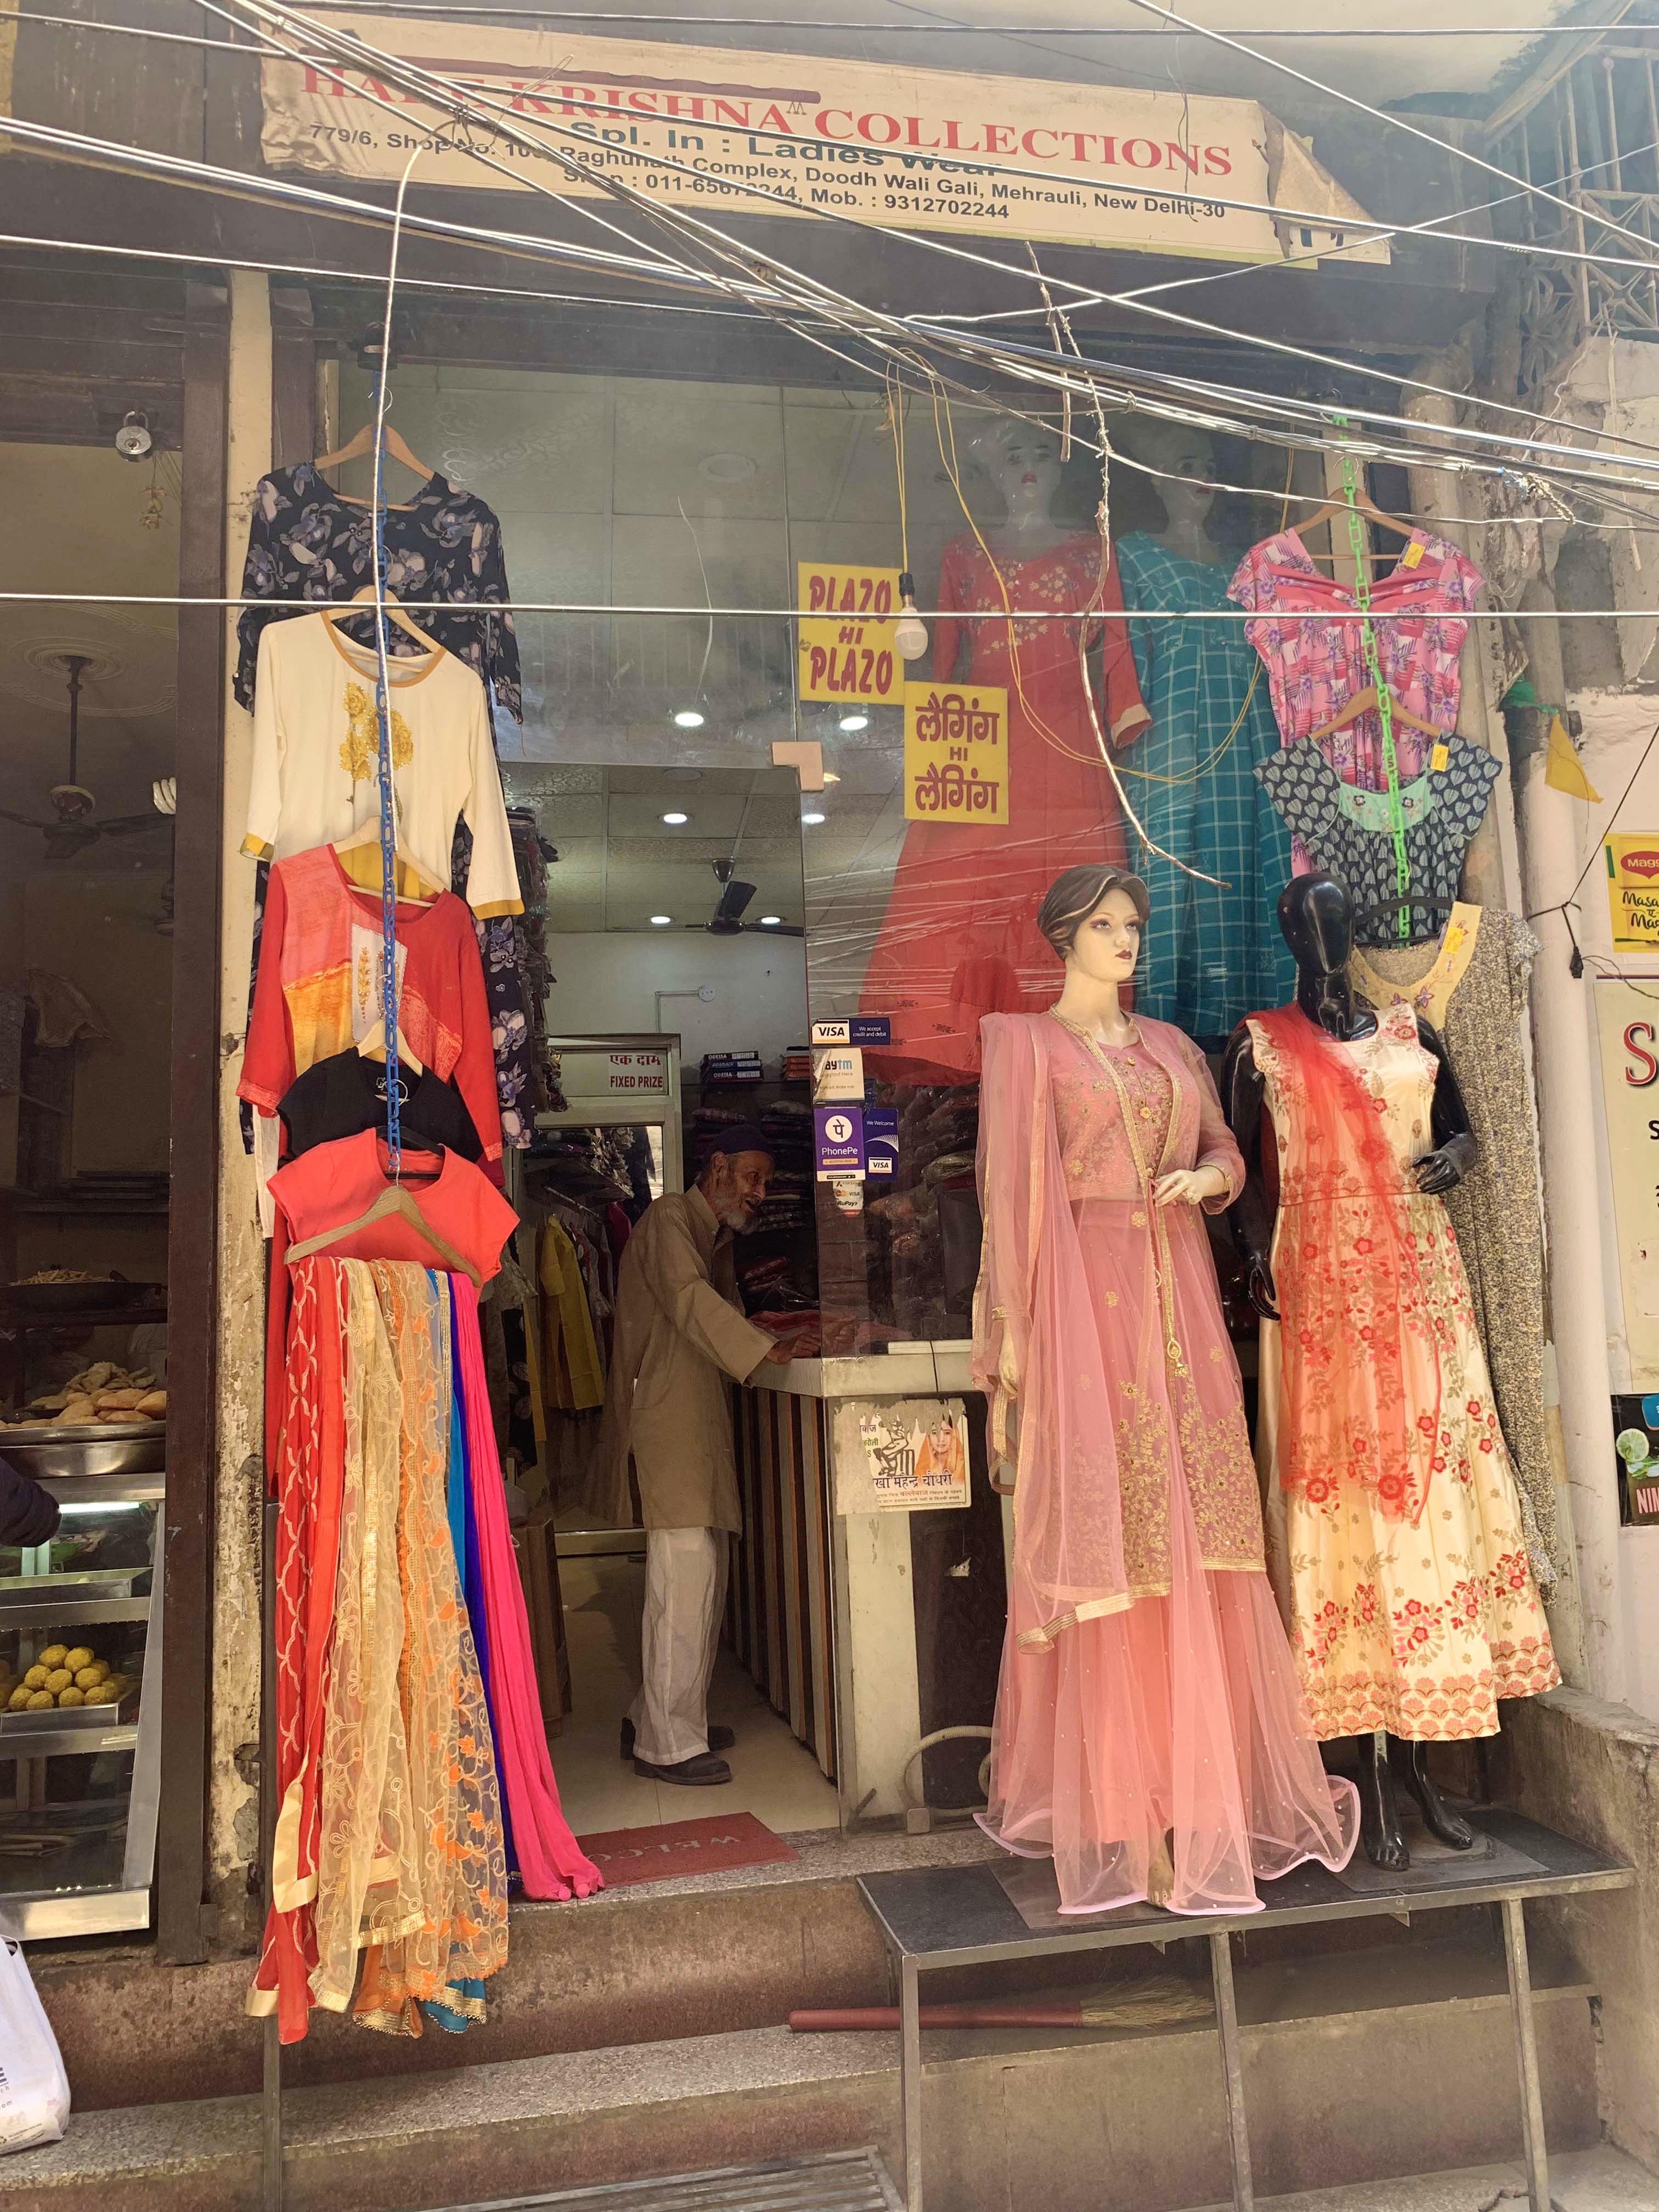 Boutique,Pink,Textile,Display window,Dress,Retail,Room,Temple,Peach,Building